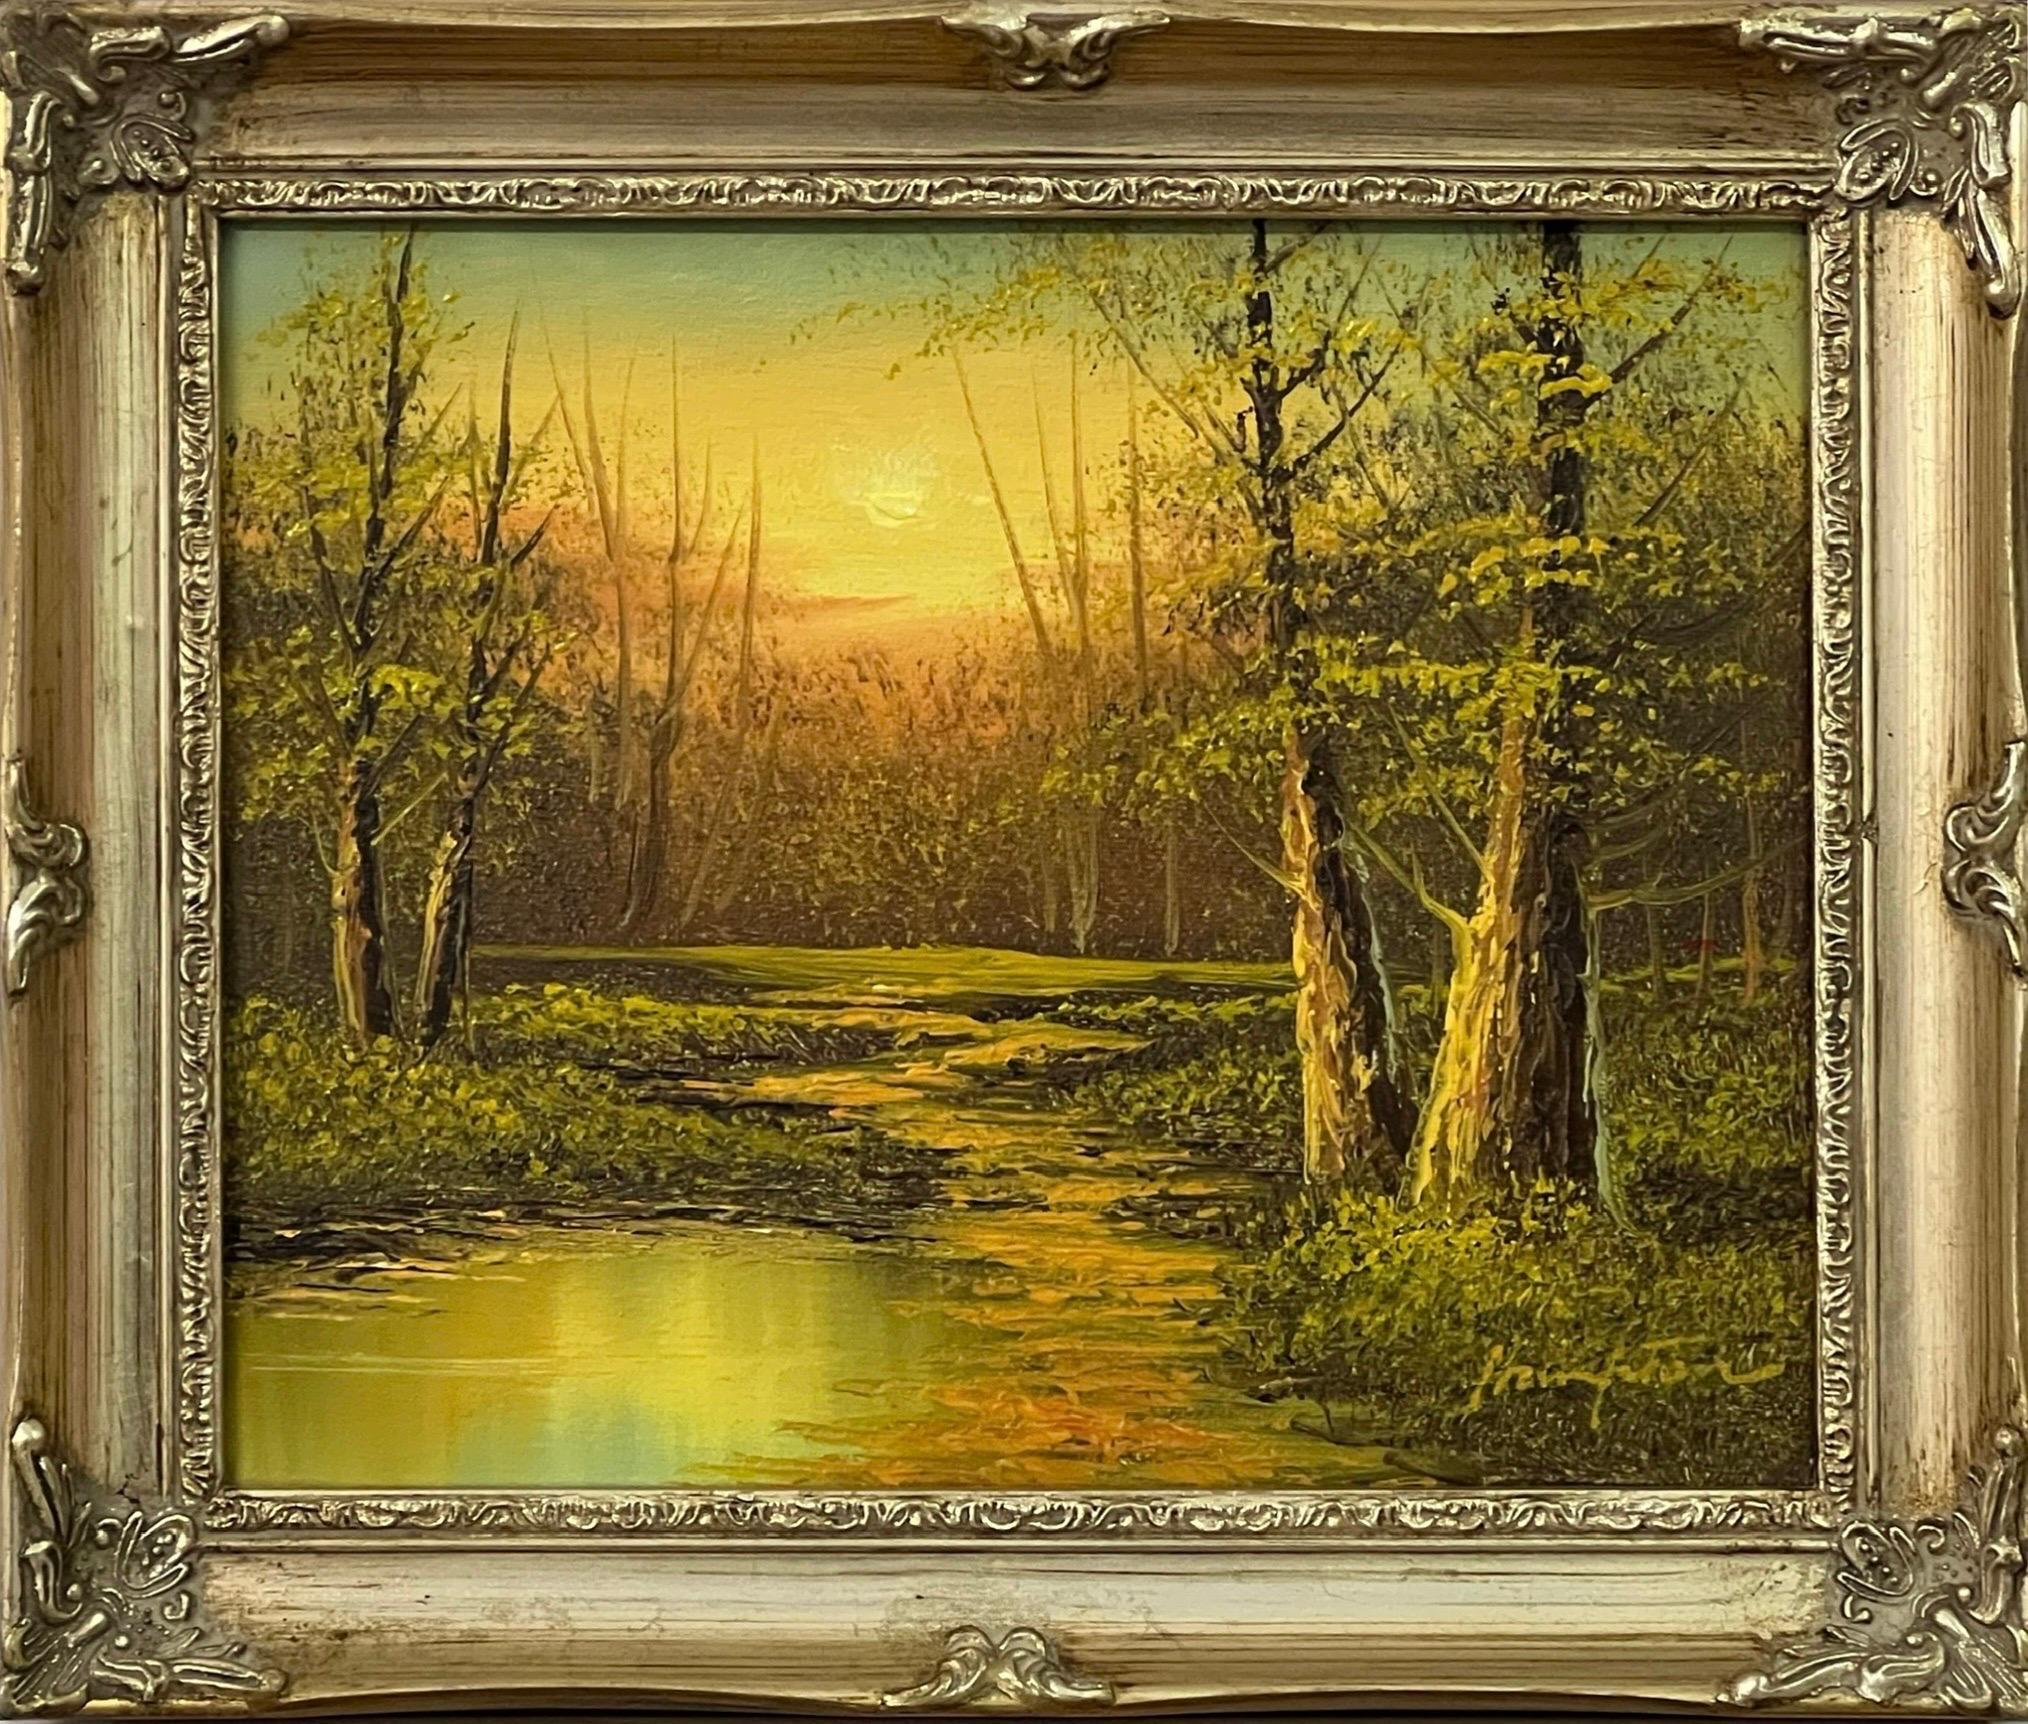 Hampton Figurative Painting - Vintage Oil Painting of River Sunset in the Woods of the English Countryside